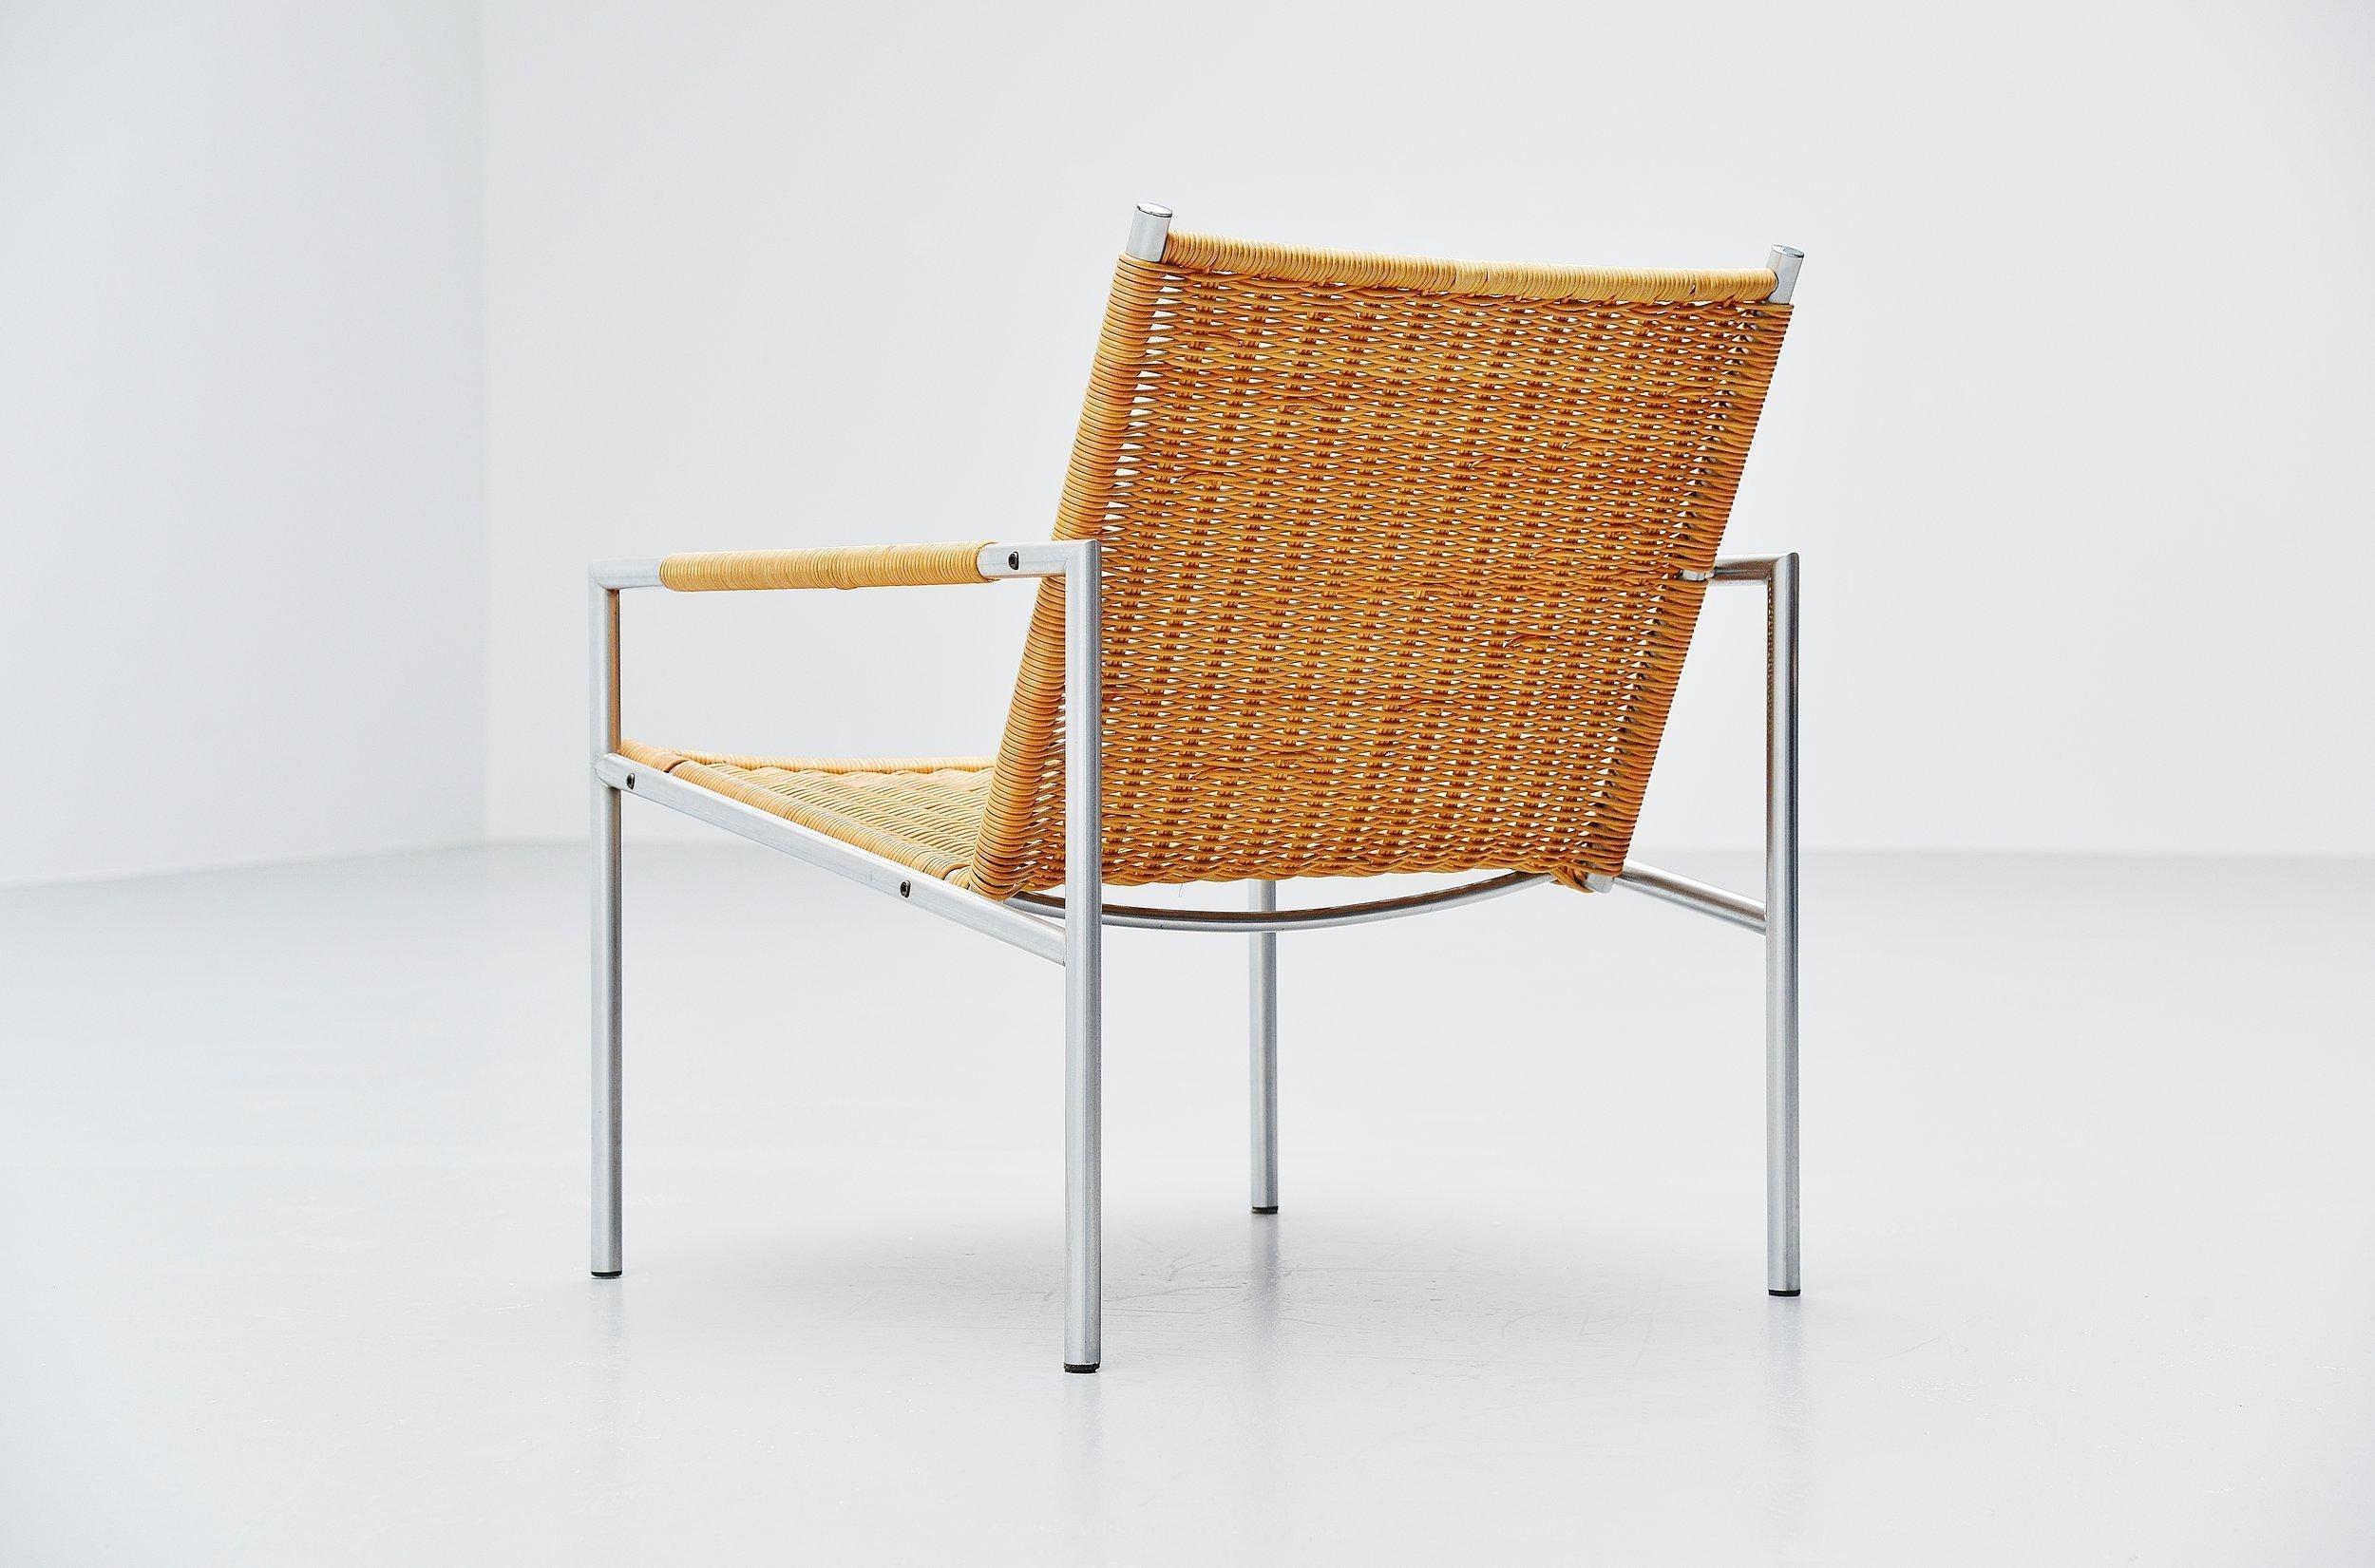 Modernist lounge chair model SZ01 designed by Martin Visser for ‘t Spectrum, Holland, 1960. The chair has a brushed steel tubular frame and very nice woven cane seats and arm rests finishing. The cane has a nice patina from usage but is still in